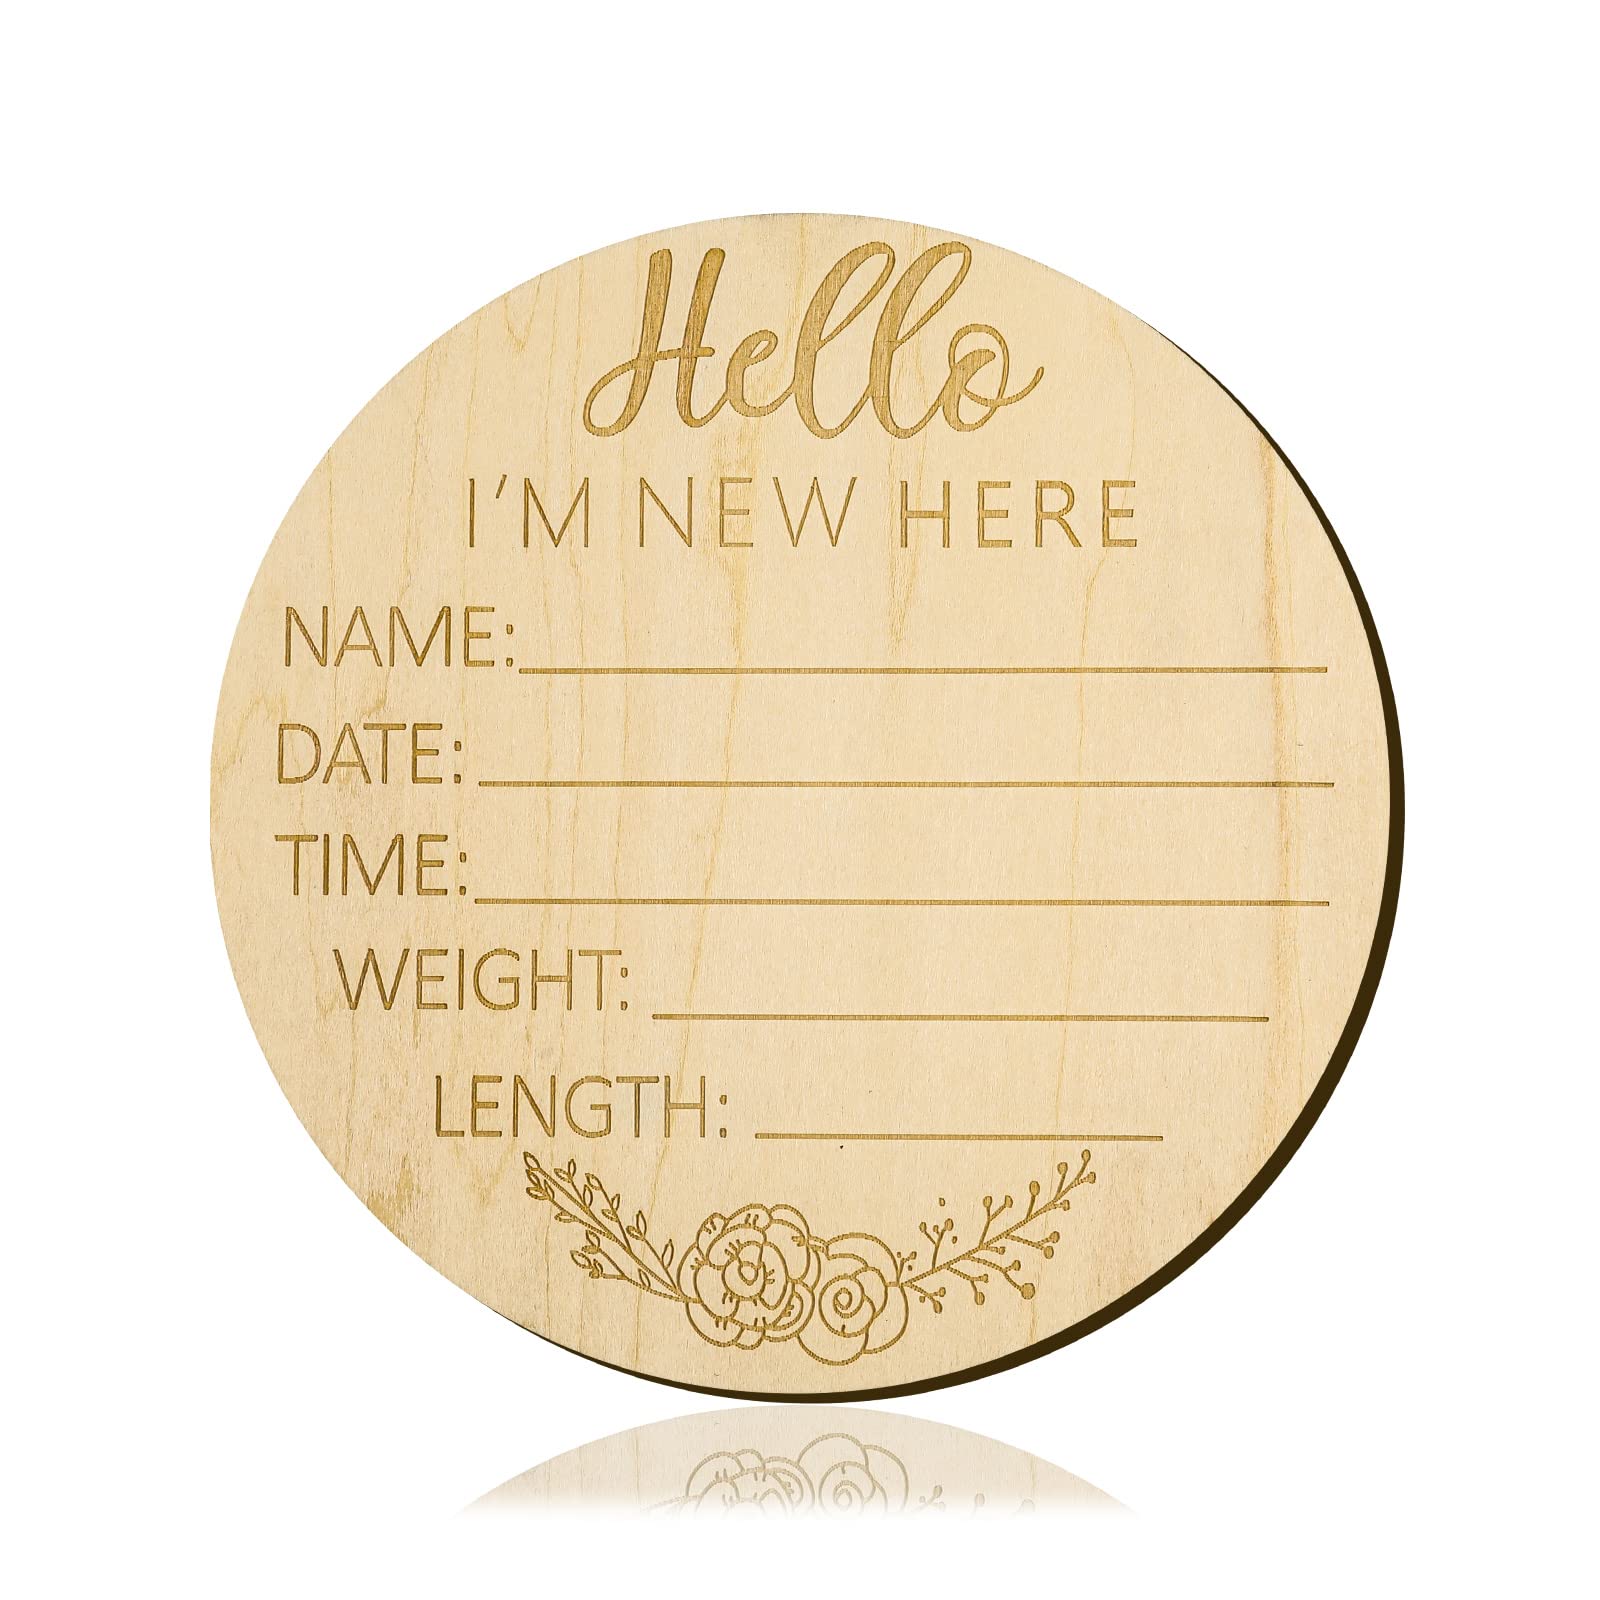 LUTER Baby Announcement Sign, 5.9 inch Hello World Newborn Sign Round Wooden Milestone Baby Nursery Name Signs for Hospital and Pregnancy Announcements